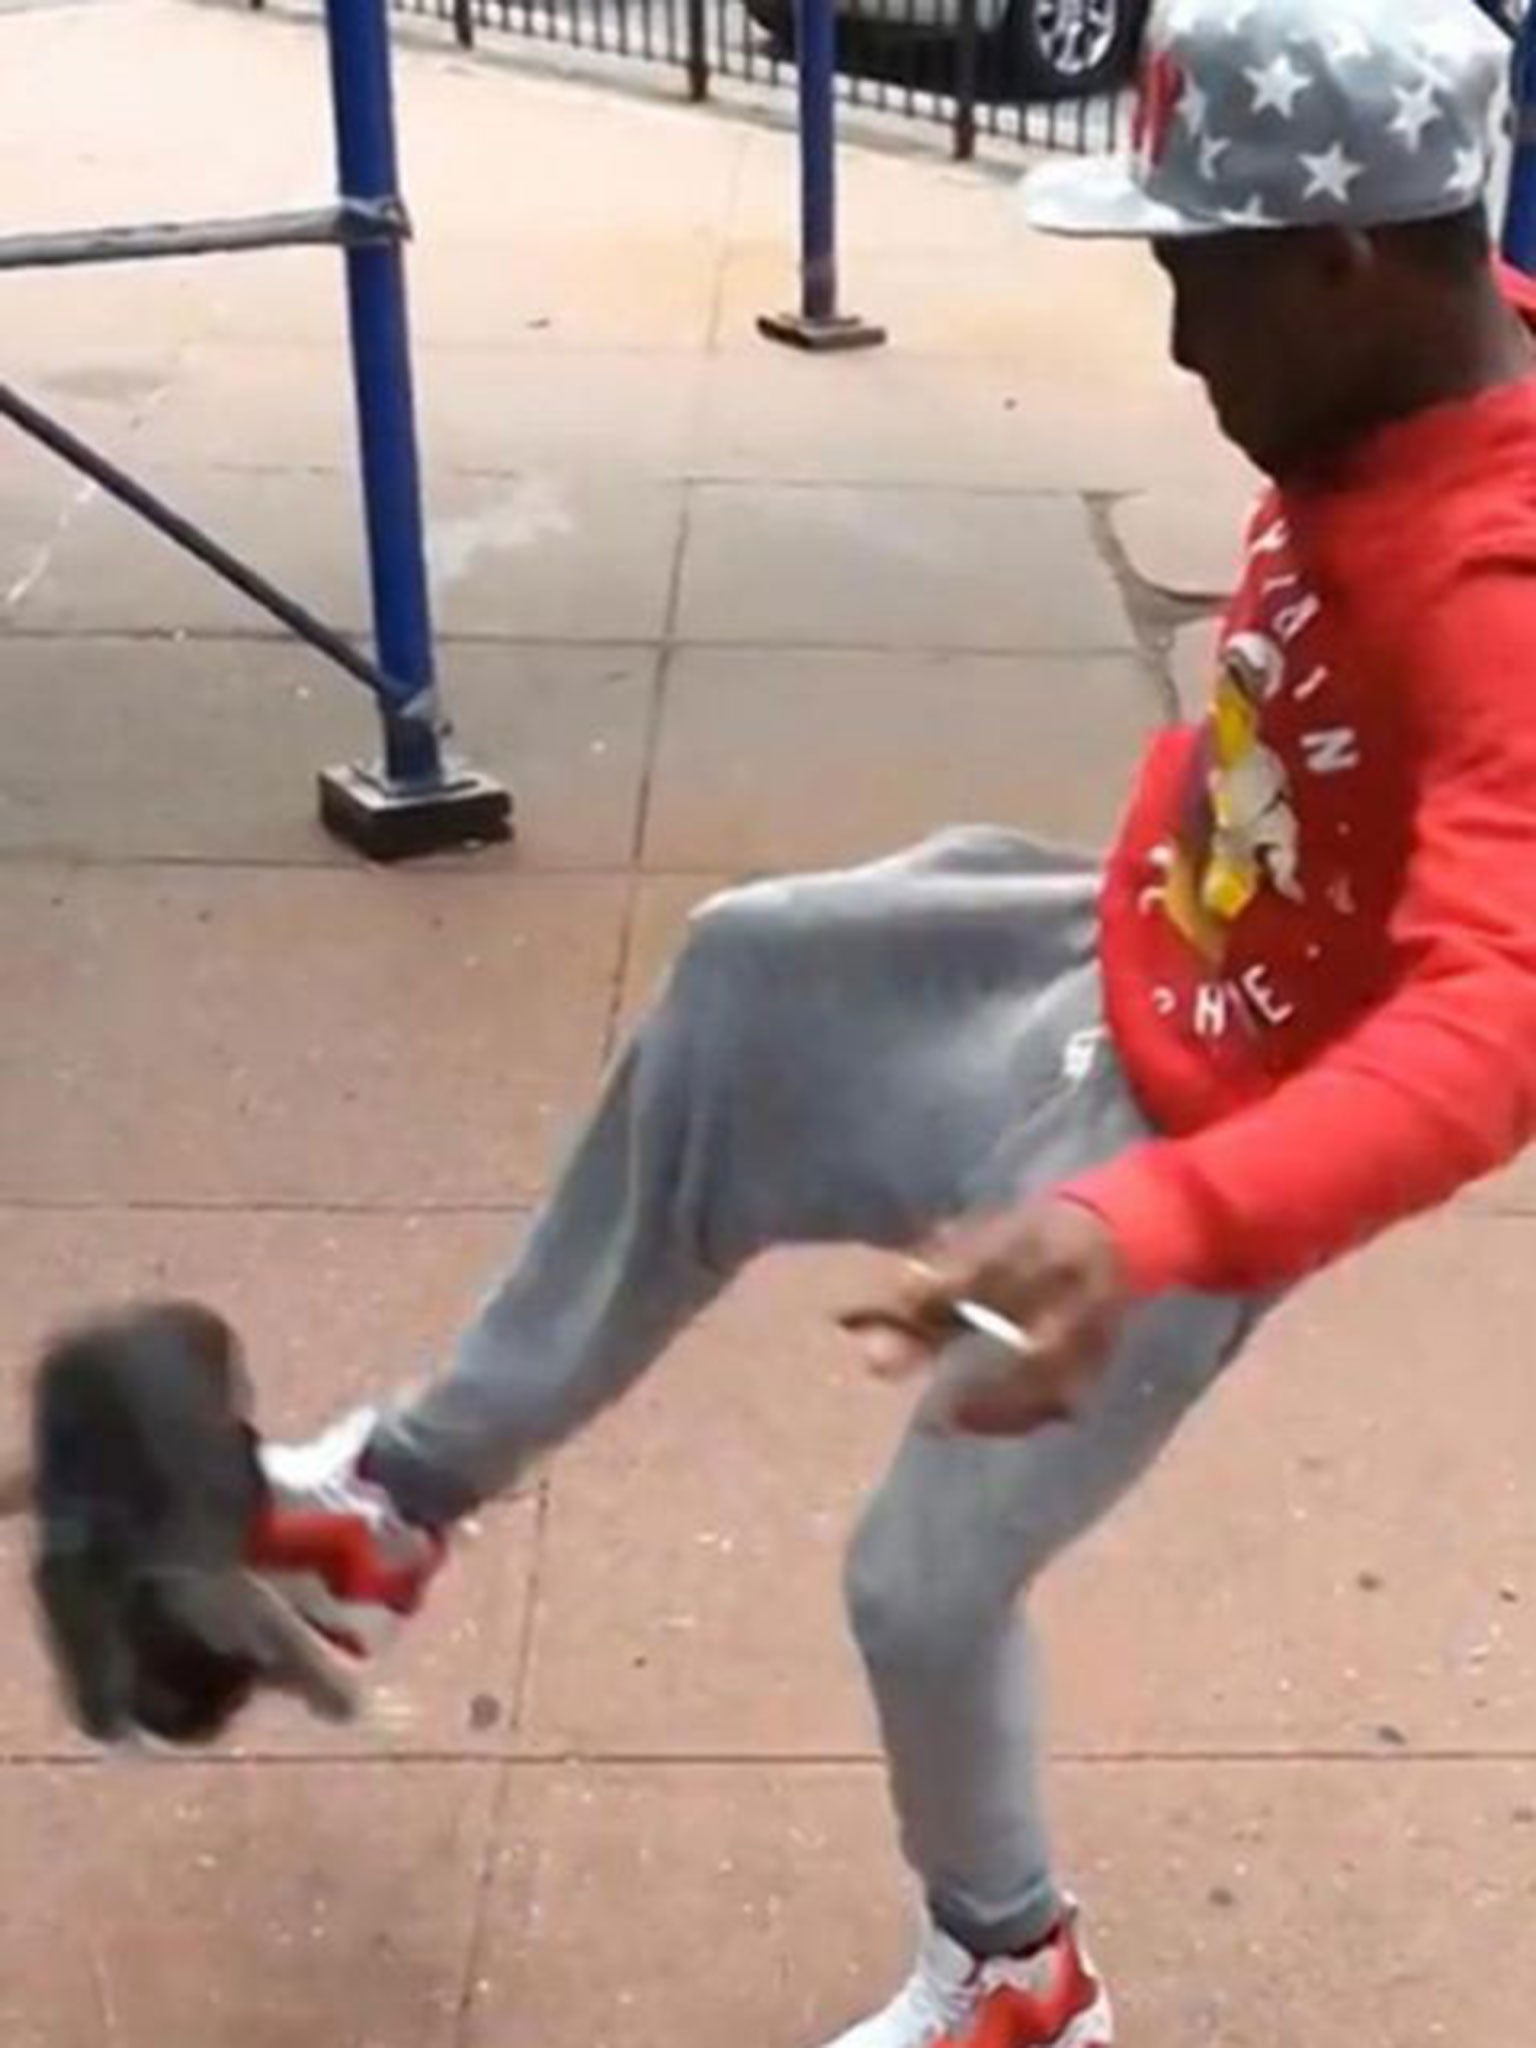 Andre Robinson caught on video kicking the cat